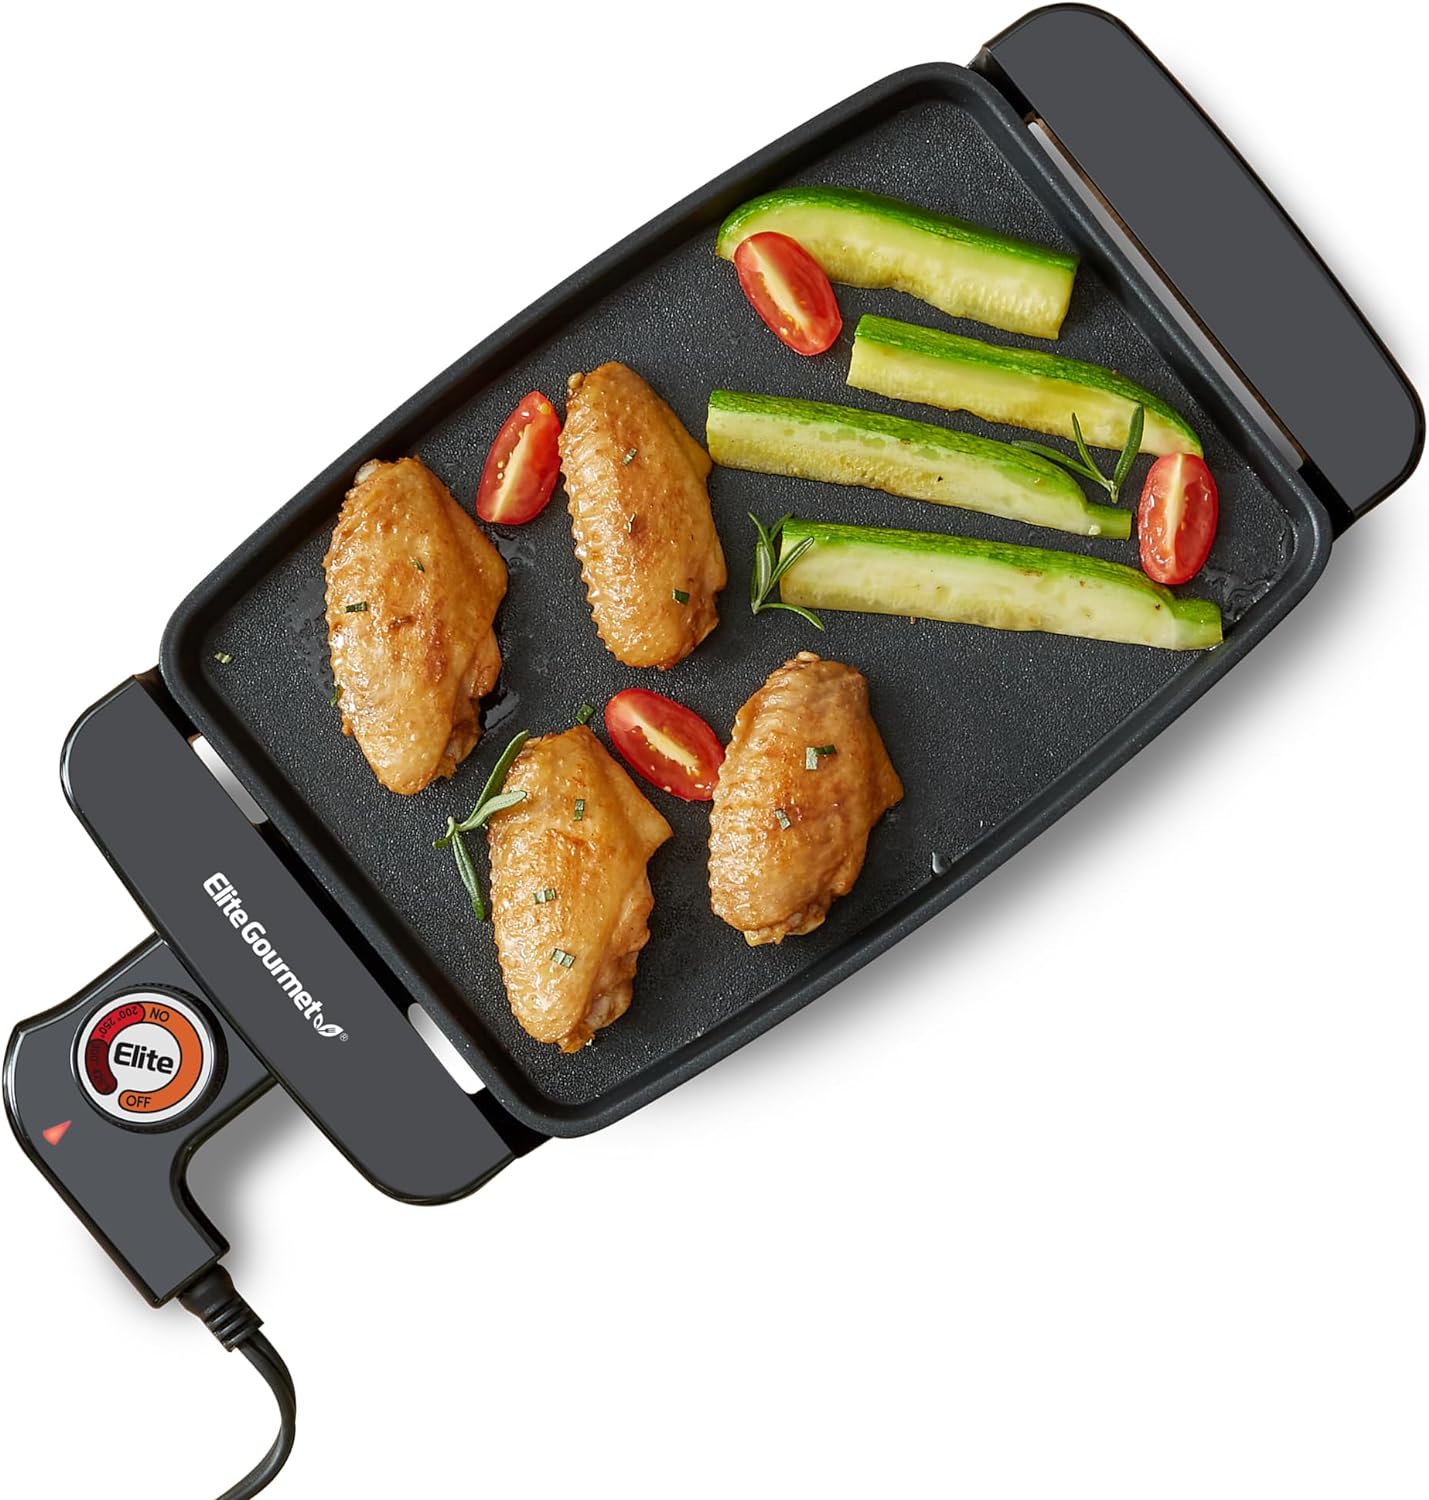 Elite Gourmet EGR2722A Electric 10.5 x 8.5 Griddle, Cool-touch Handles Non-Stick Surface, Removable/Adjustable Thermostat, Skid Free-Rubber Feet, Black